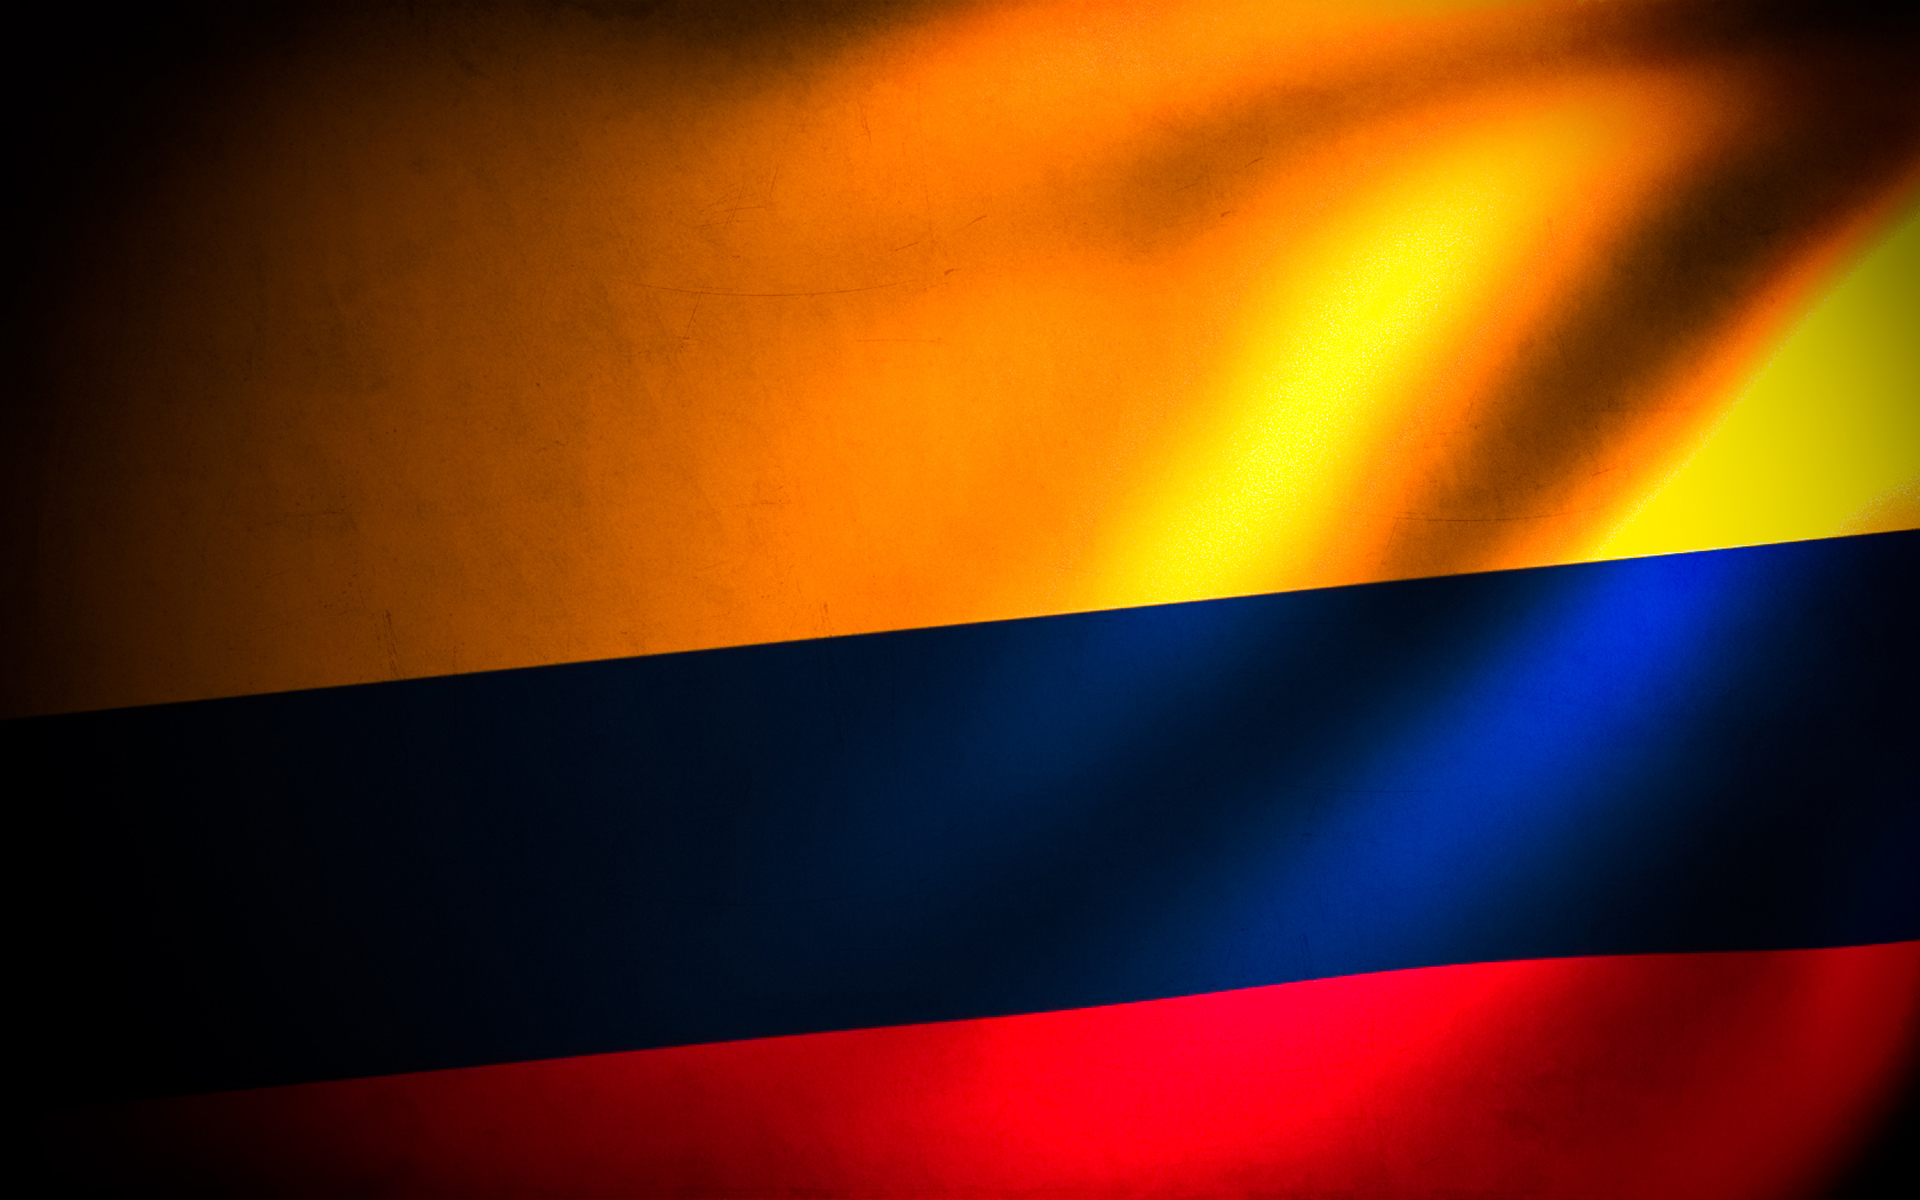 Image gallery for colombian flag wallpaper